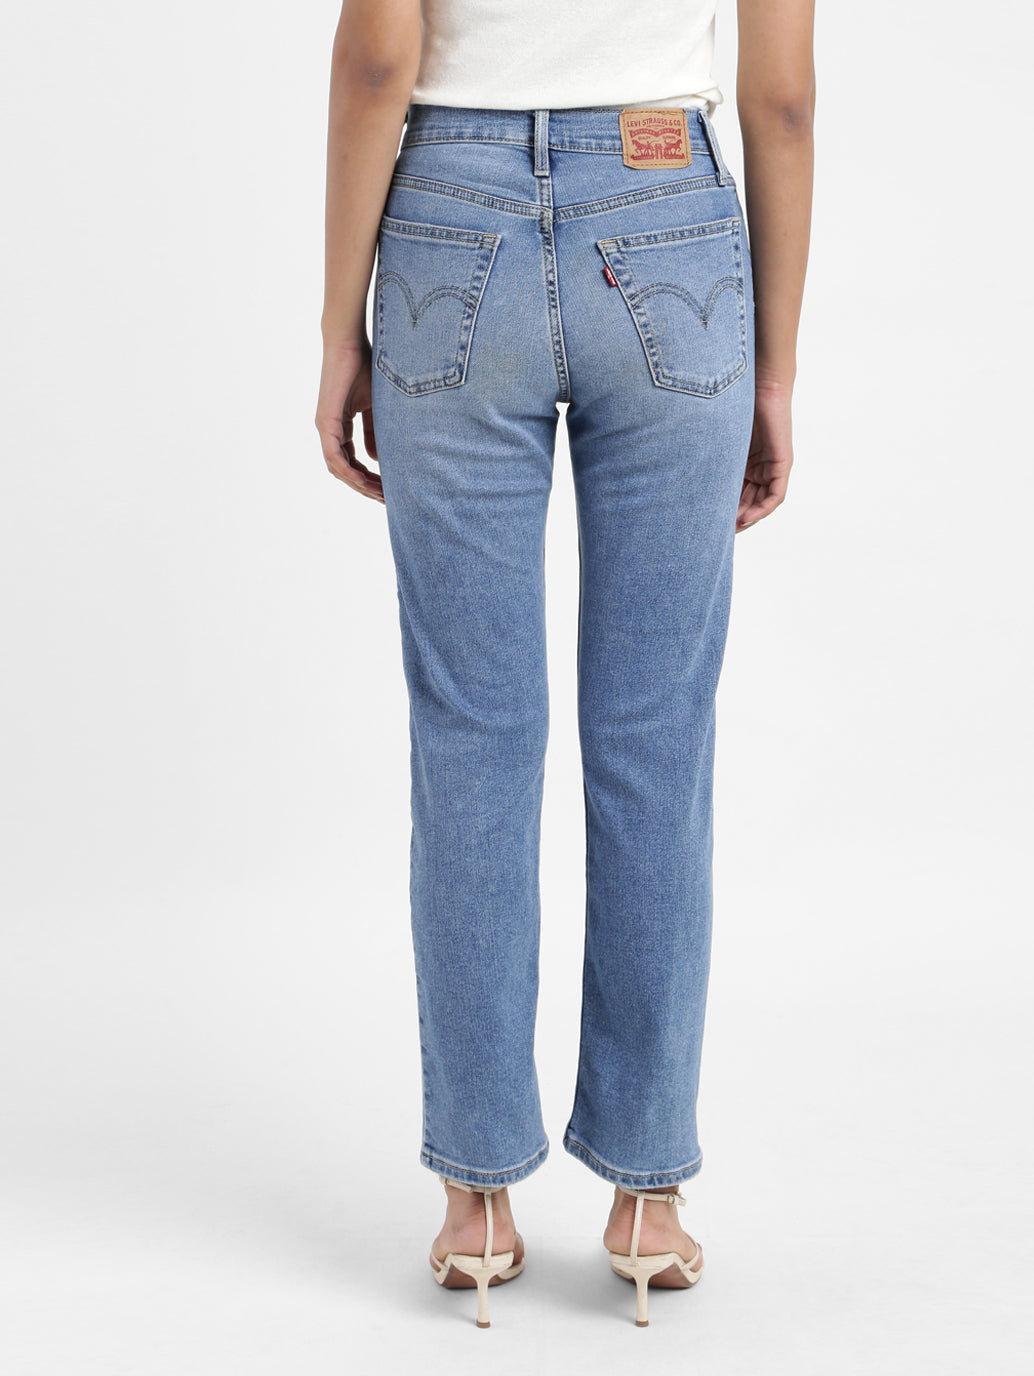 Women's High Rise Wedgie Straight Fit Jeans